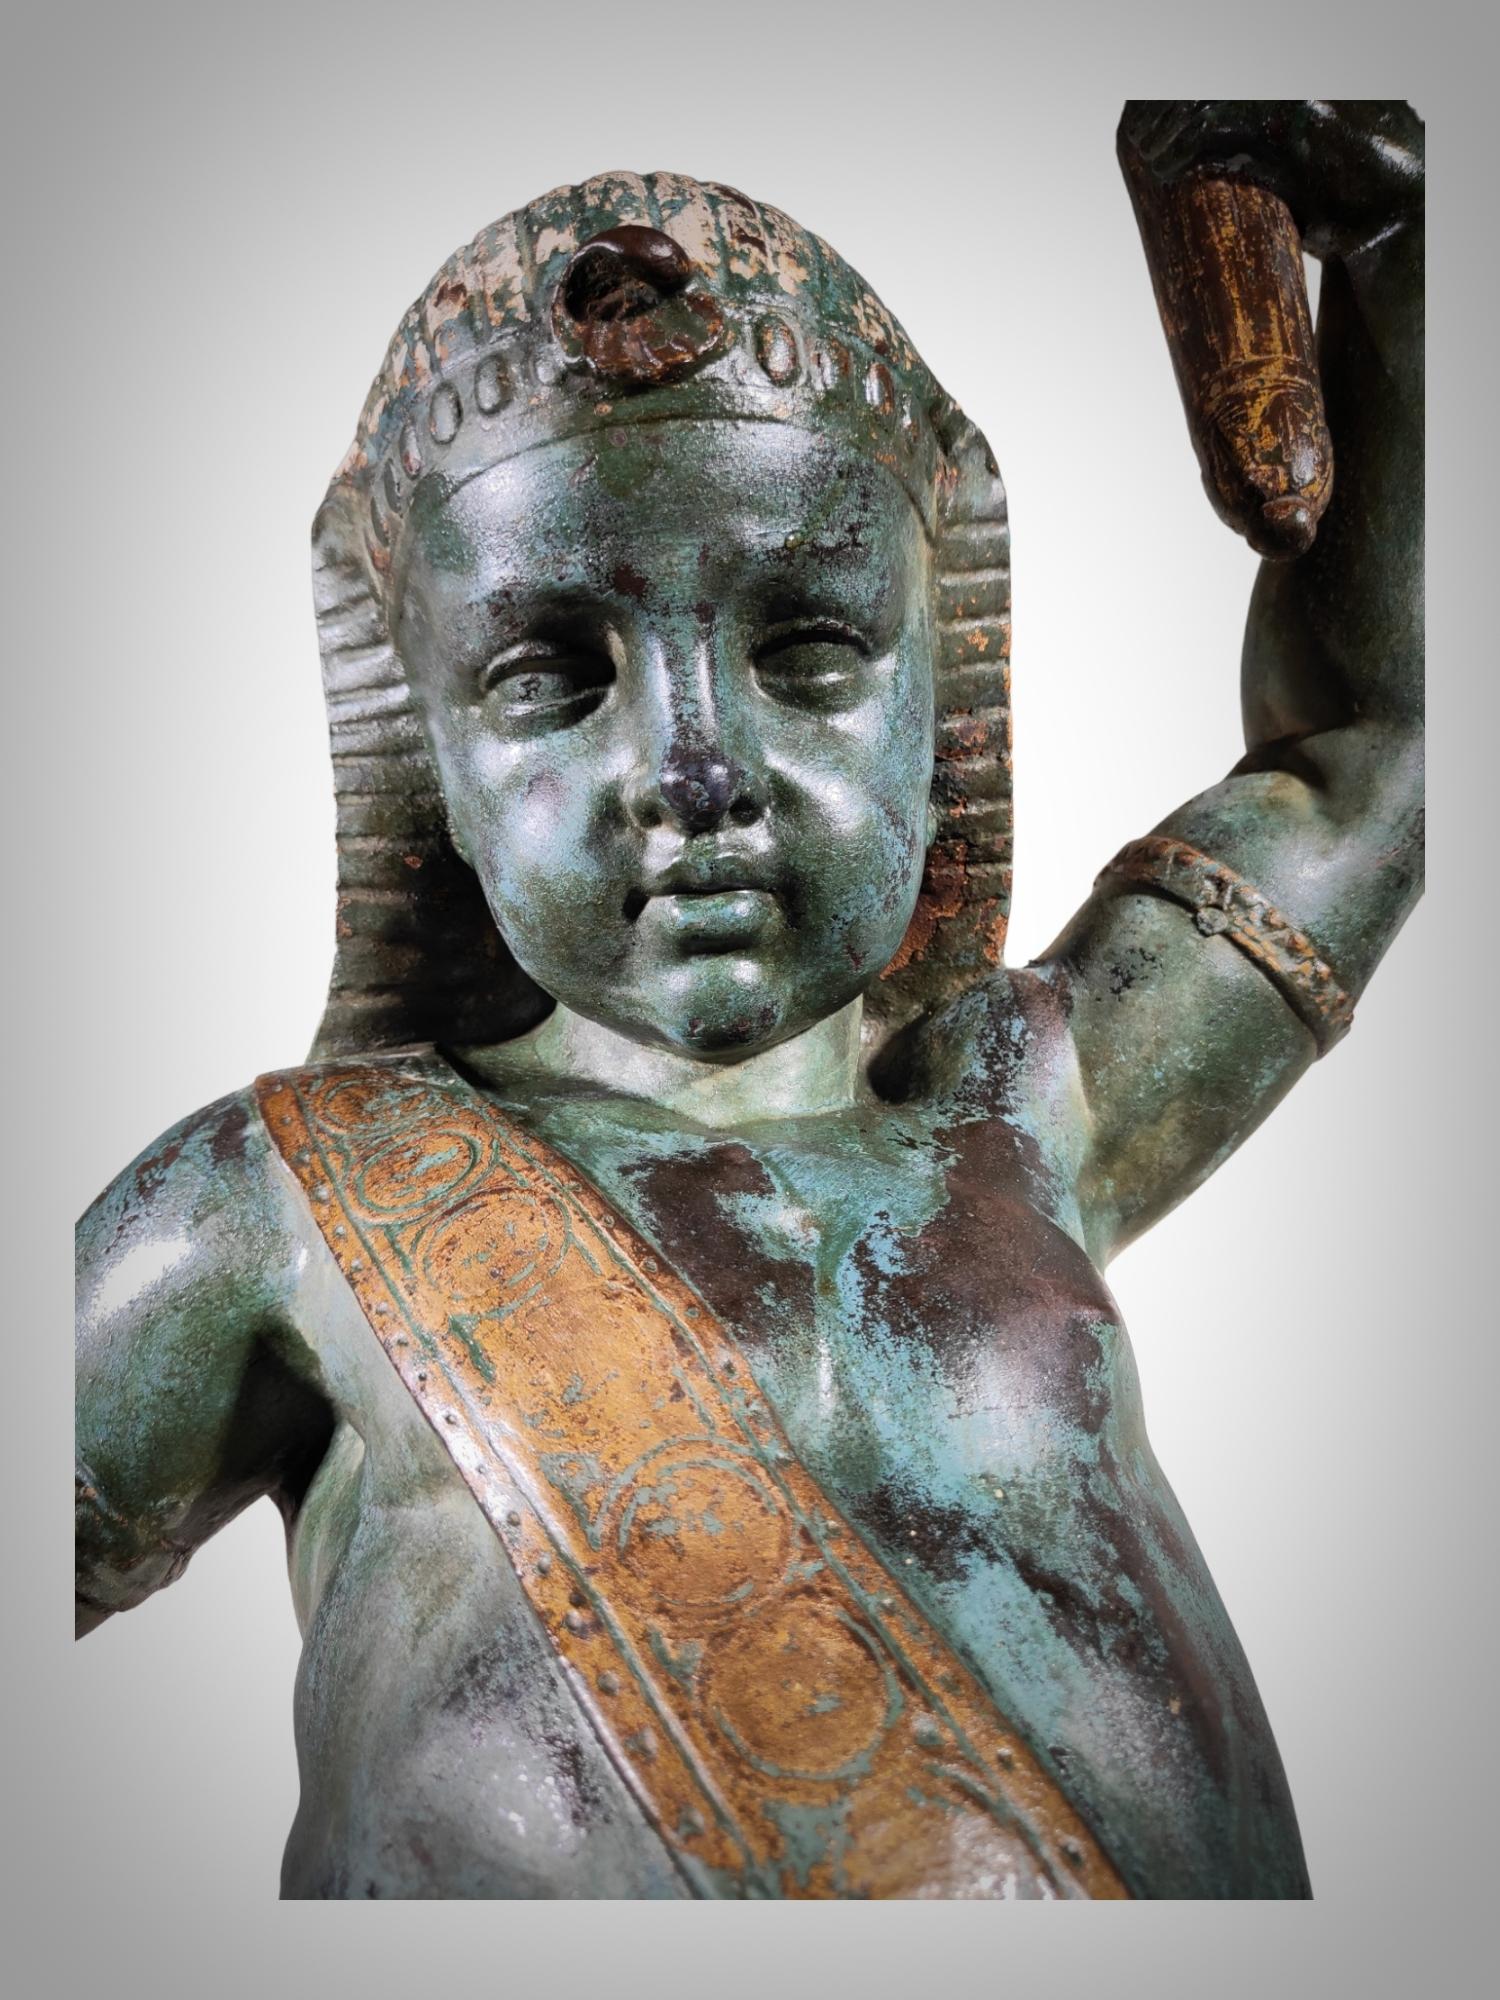 Wrought Iron Val D'osne Art Foundry, After Mathurin Moreau (1822-1912) Egyptian Sculpture For Sale